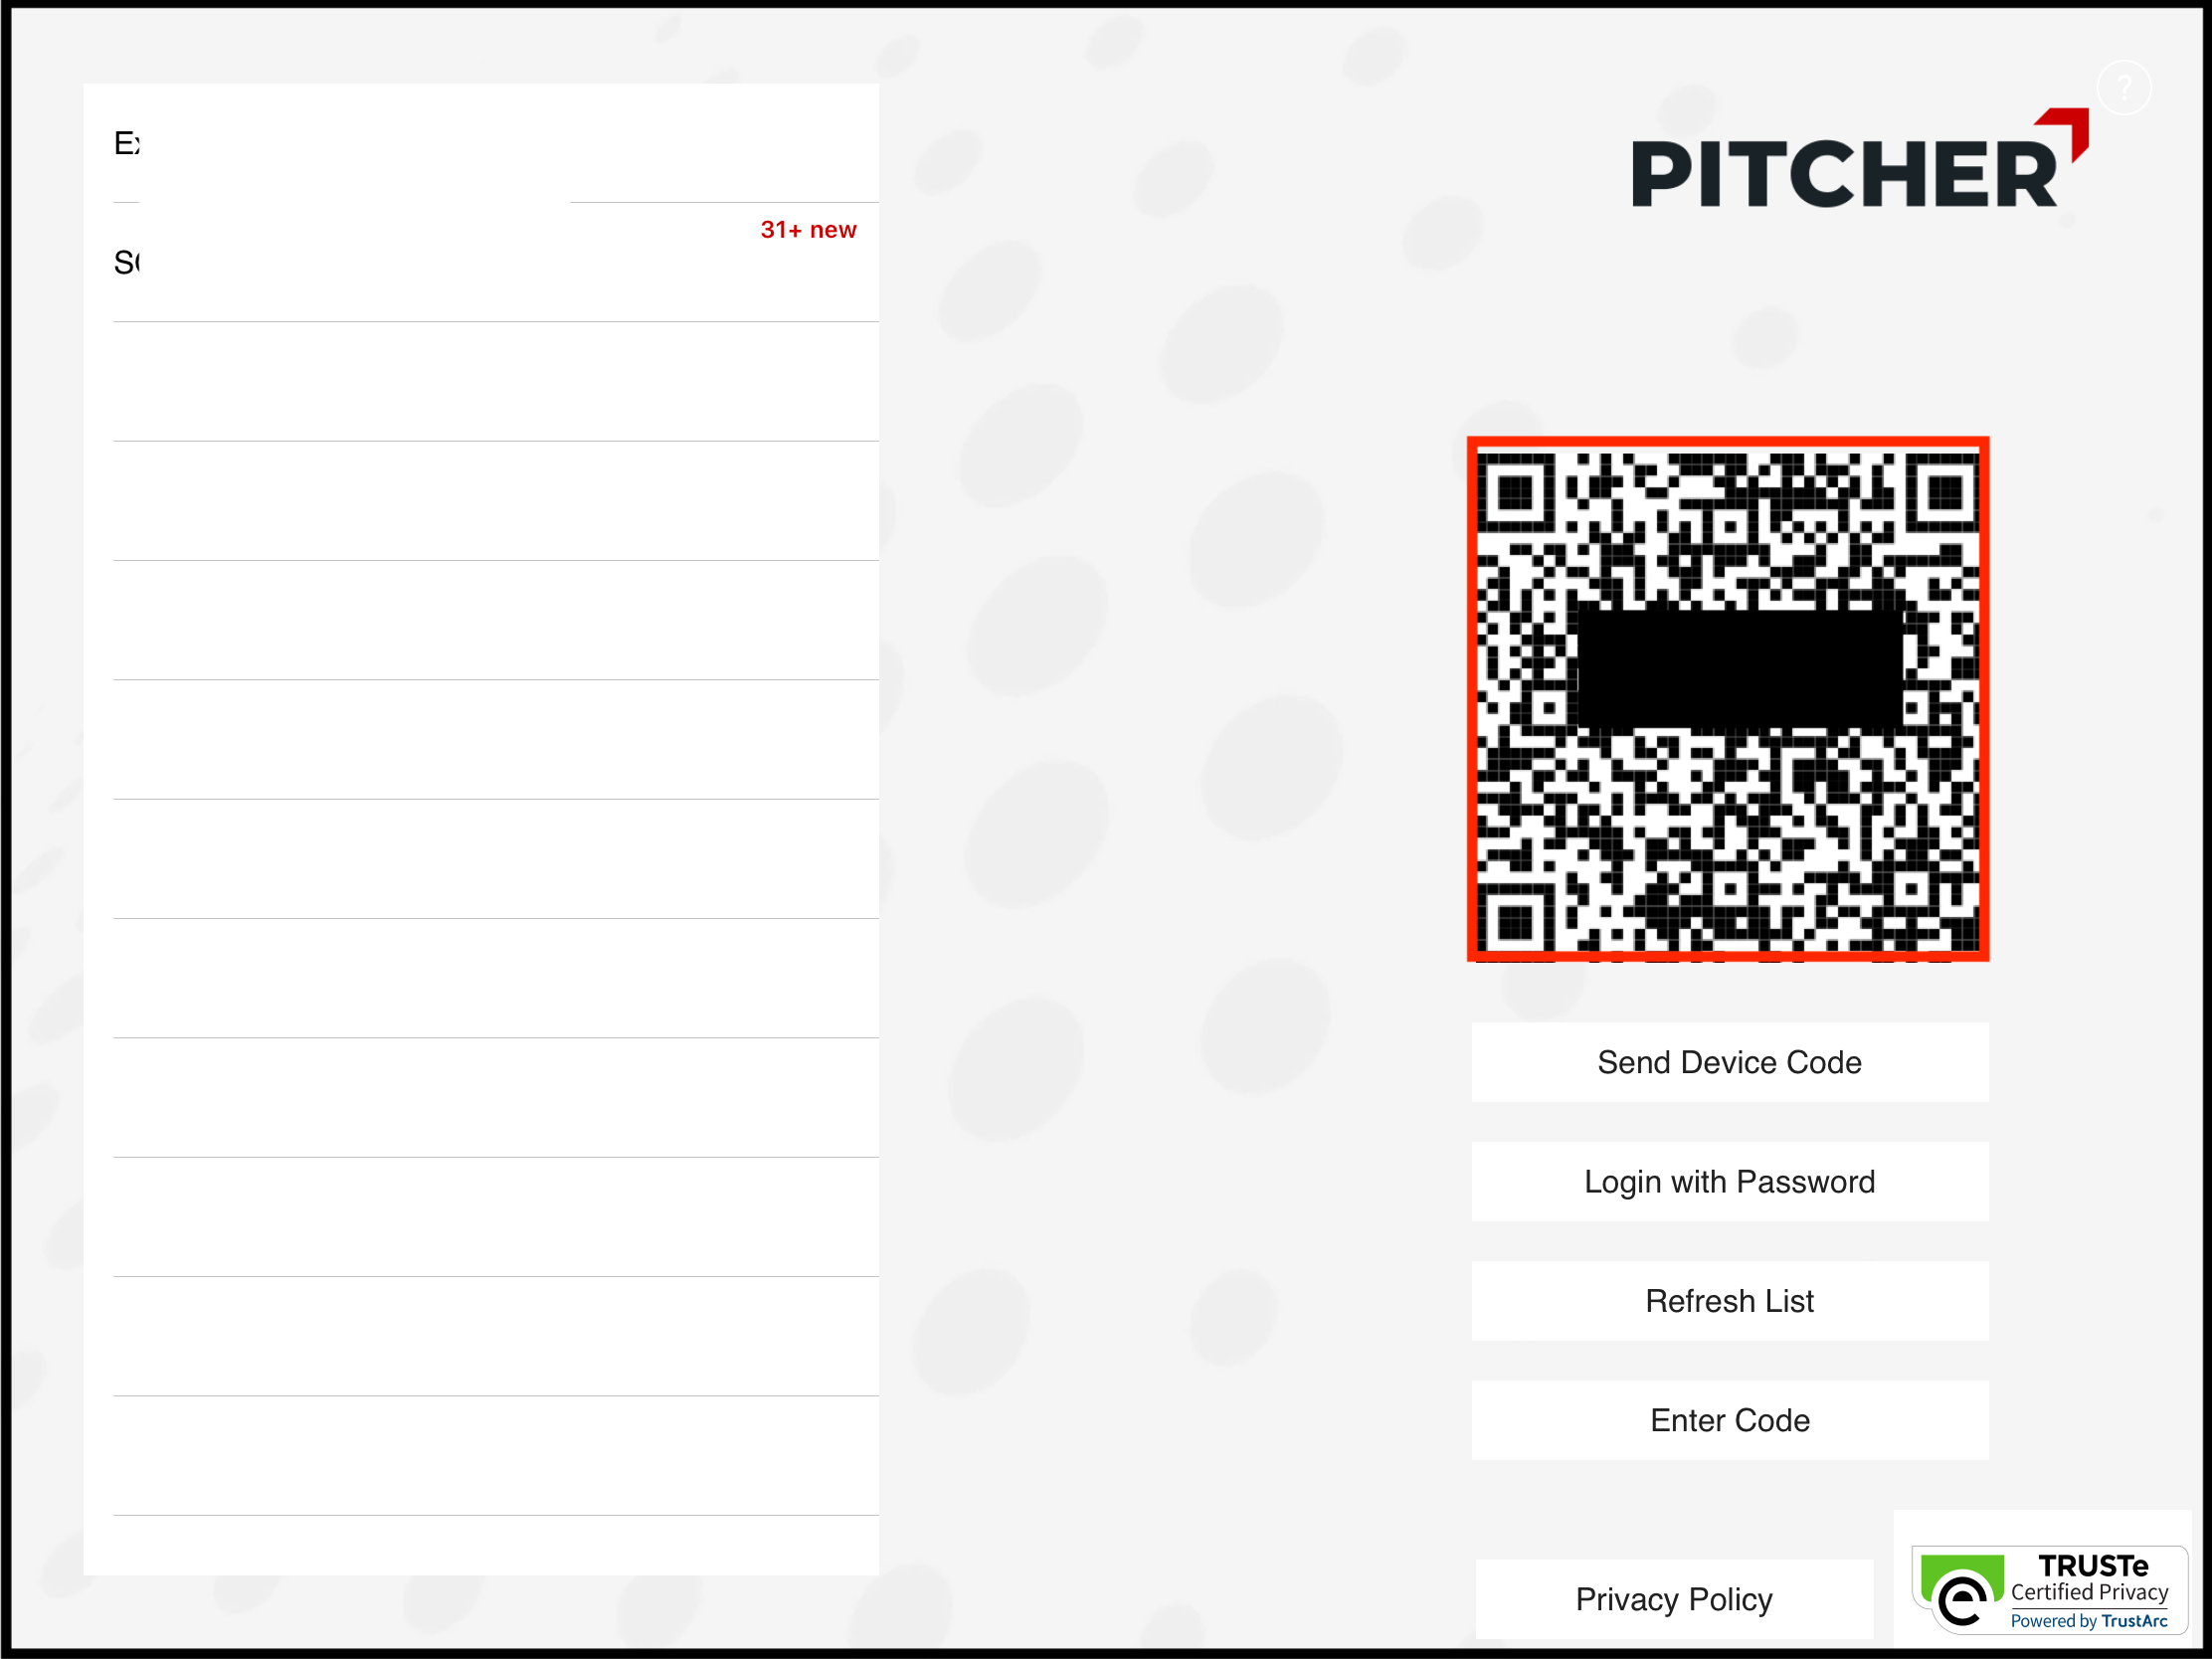 The QR Code feature in Impact App